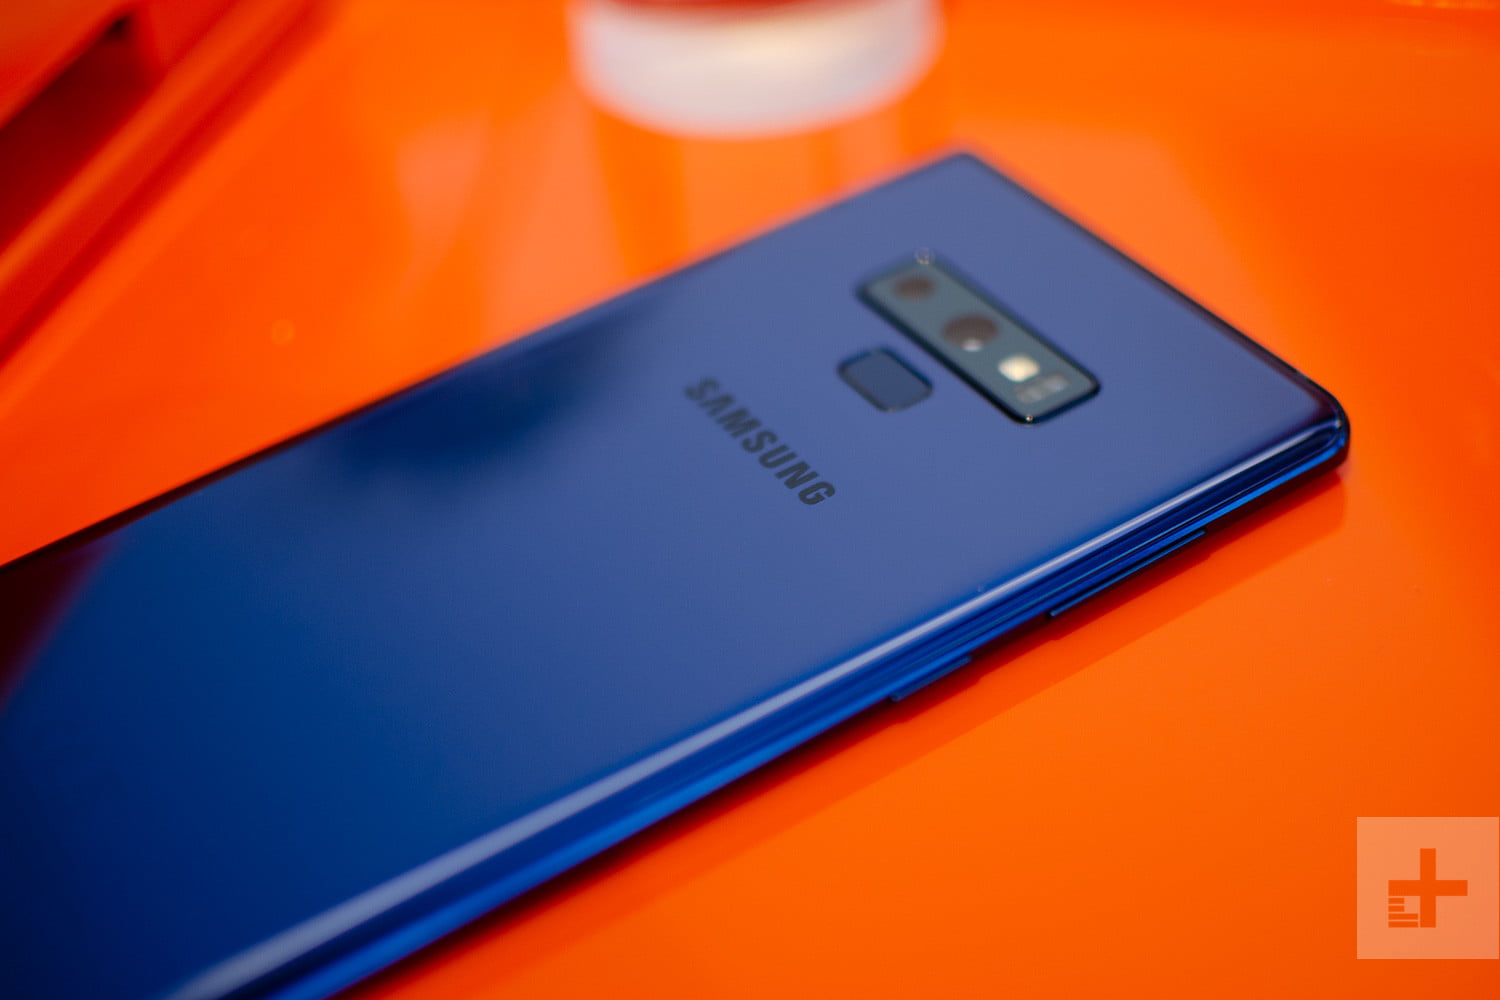 How To Setup Wi-Fi Tethering On Galaxy Note 9